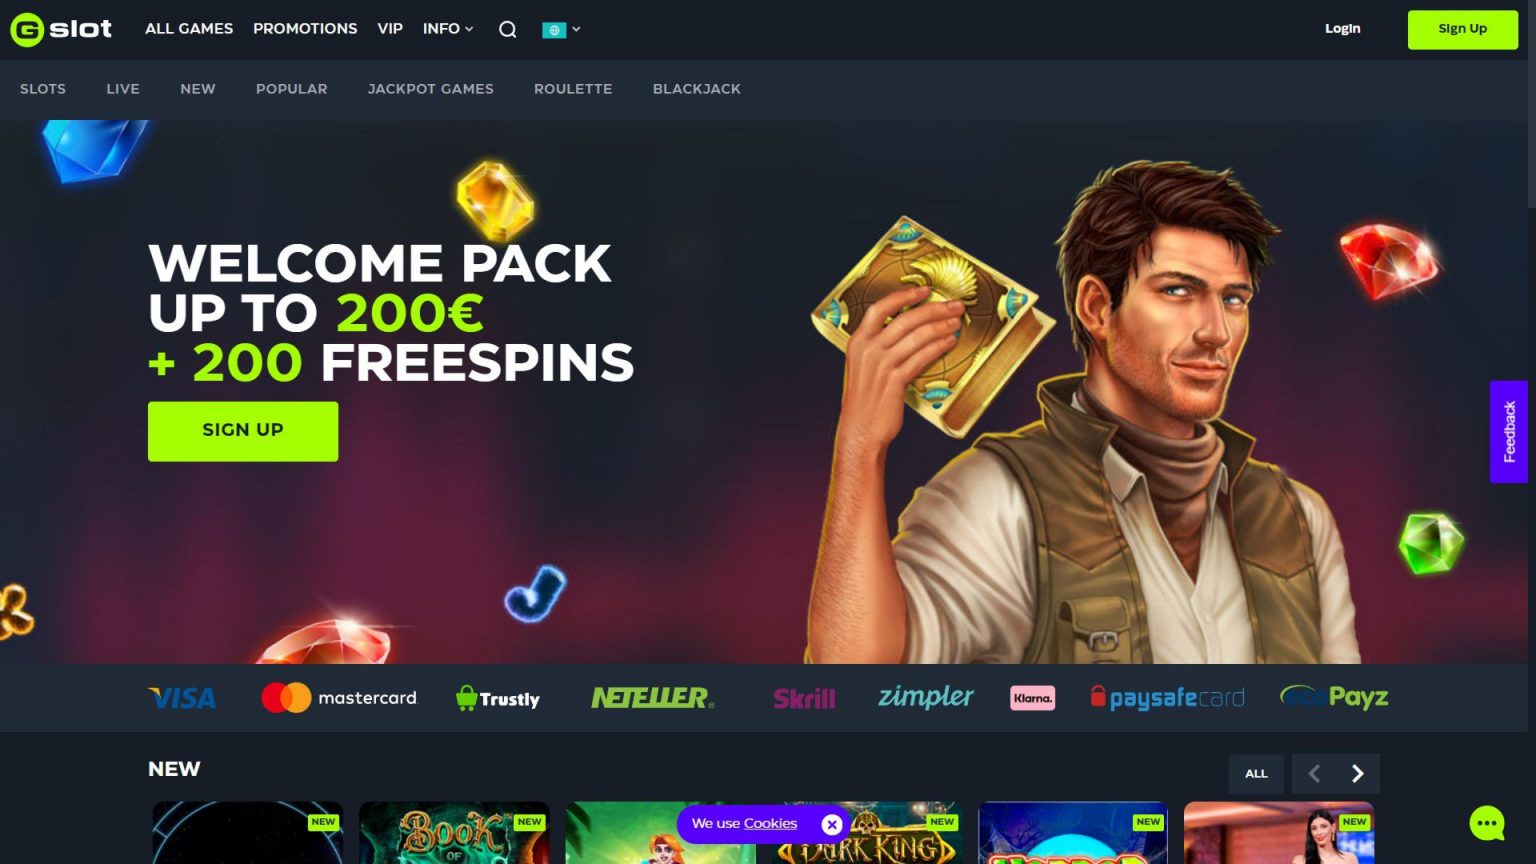 Gslot Casino Review - Welcome Bonus up to $/€200 + 200 Free Spins